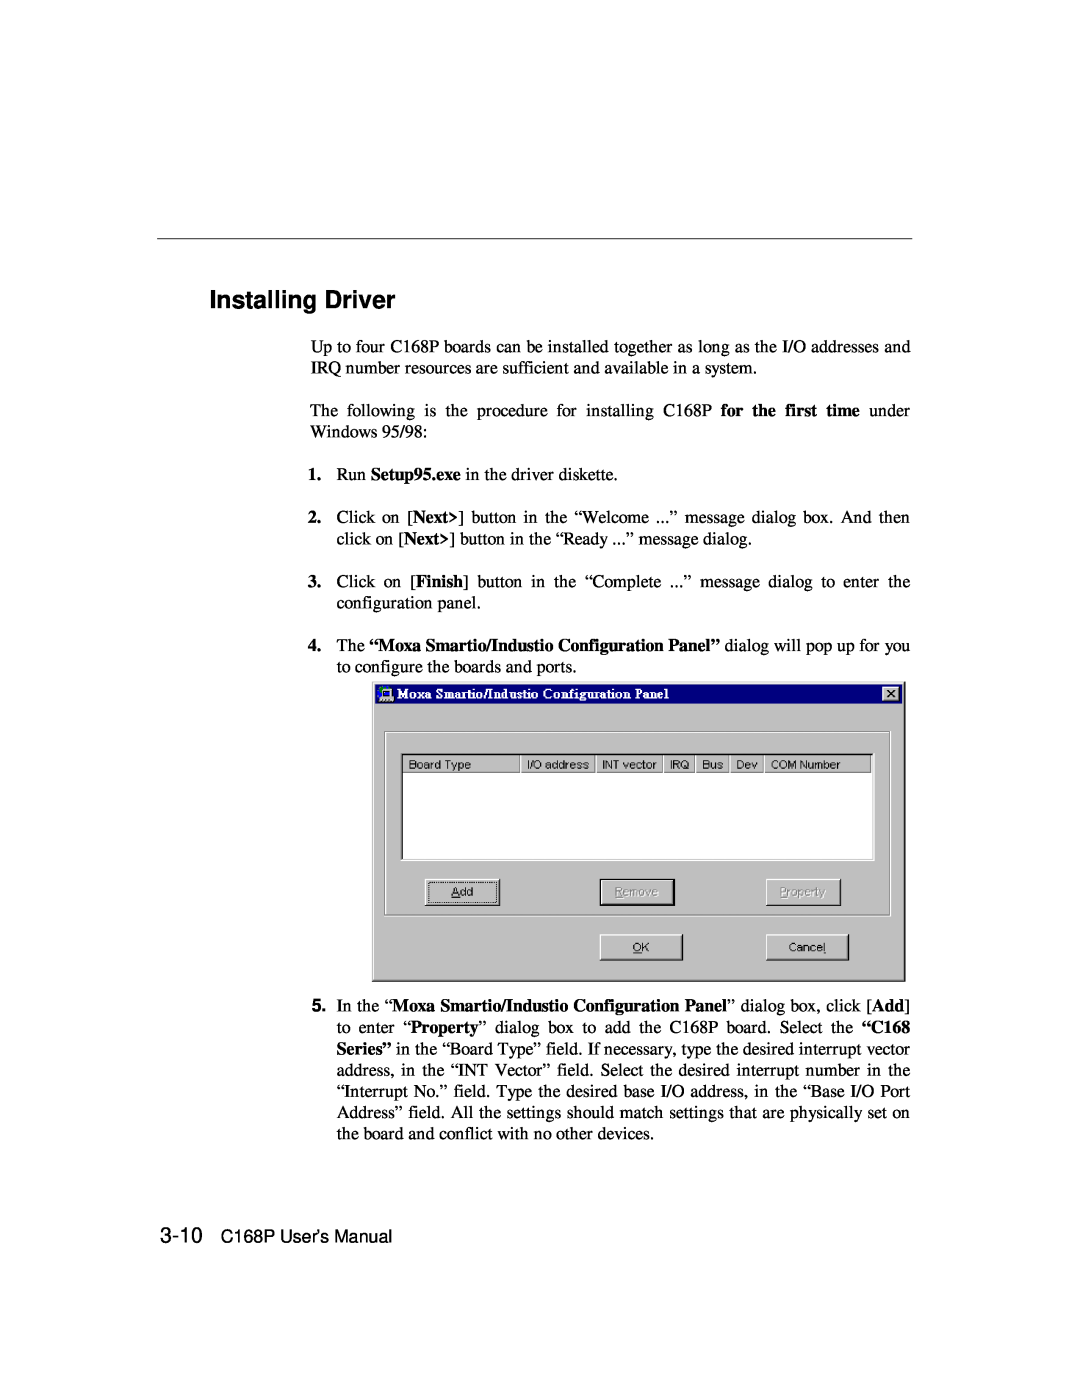 Moxa Technologies C168P user manual Installing Driver, Run Setup95.exe in the driver diskette 